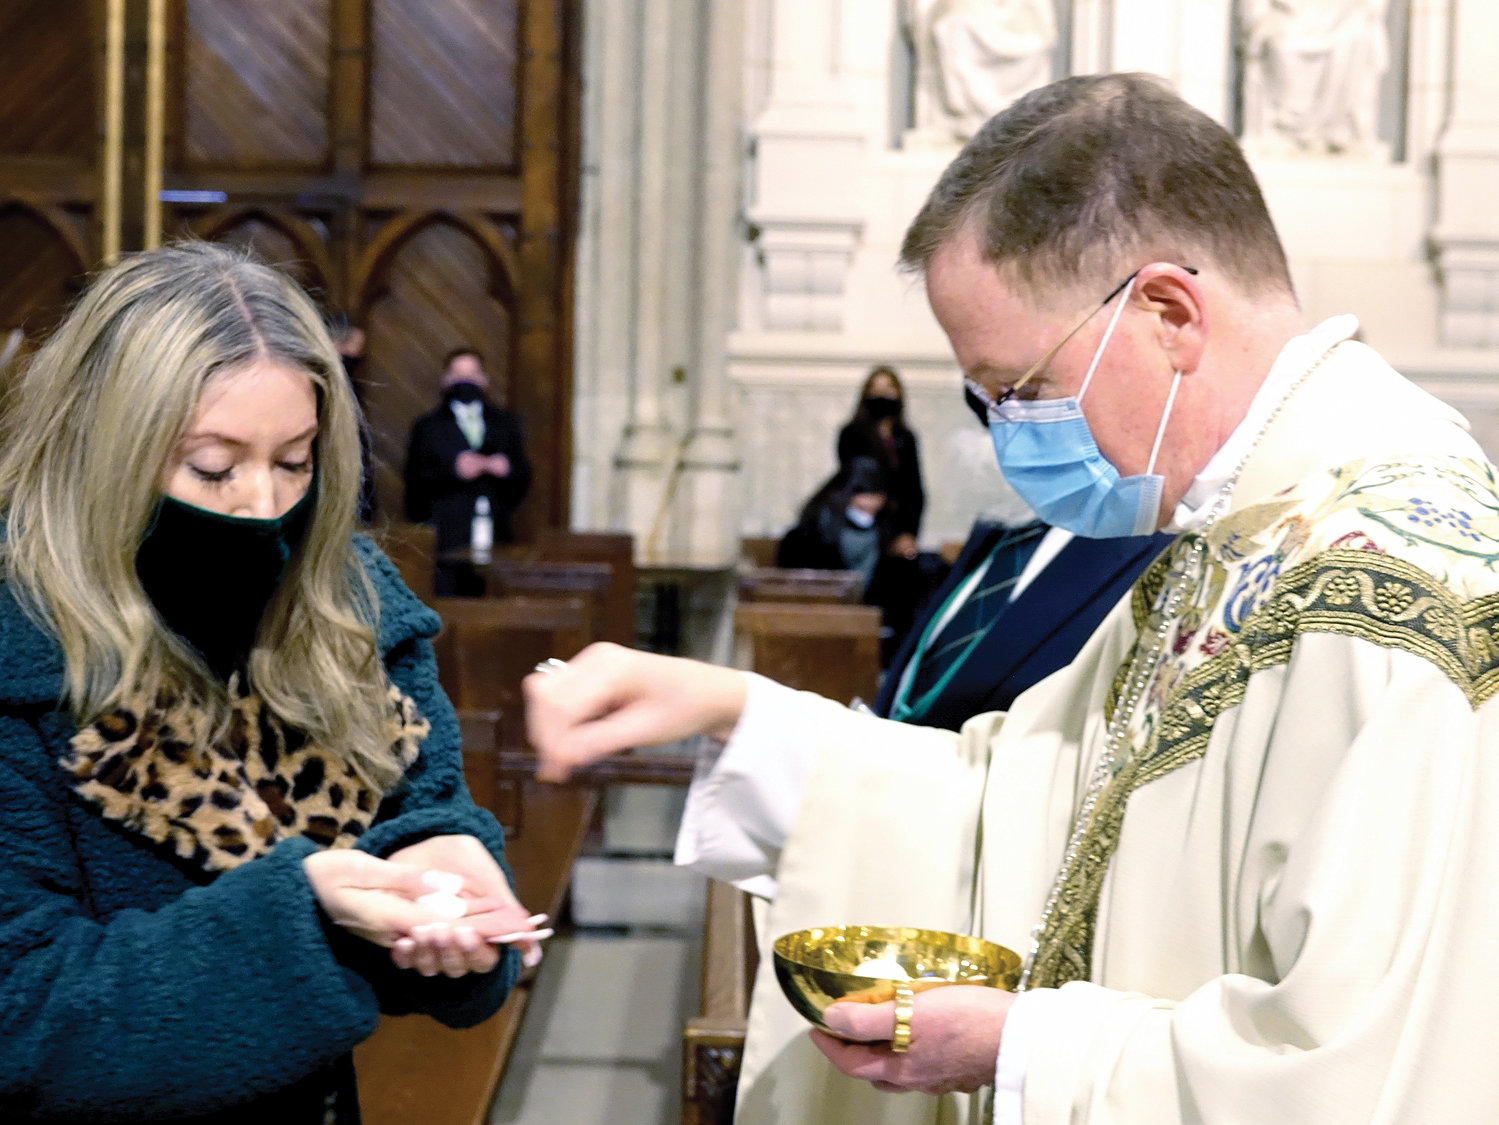 Auxiliary Bishop Edmund Whalen distributes the Eucharist during the morning liturgy. The bishop was cited as part of the parade’s first-ever honor guard of first responders and essential workers.